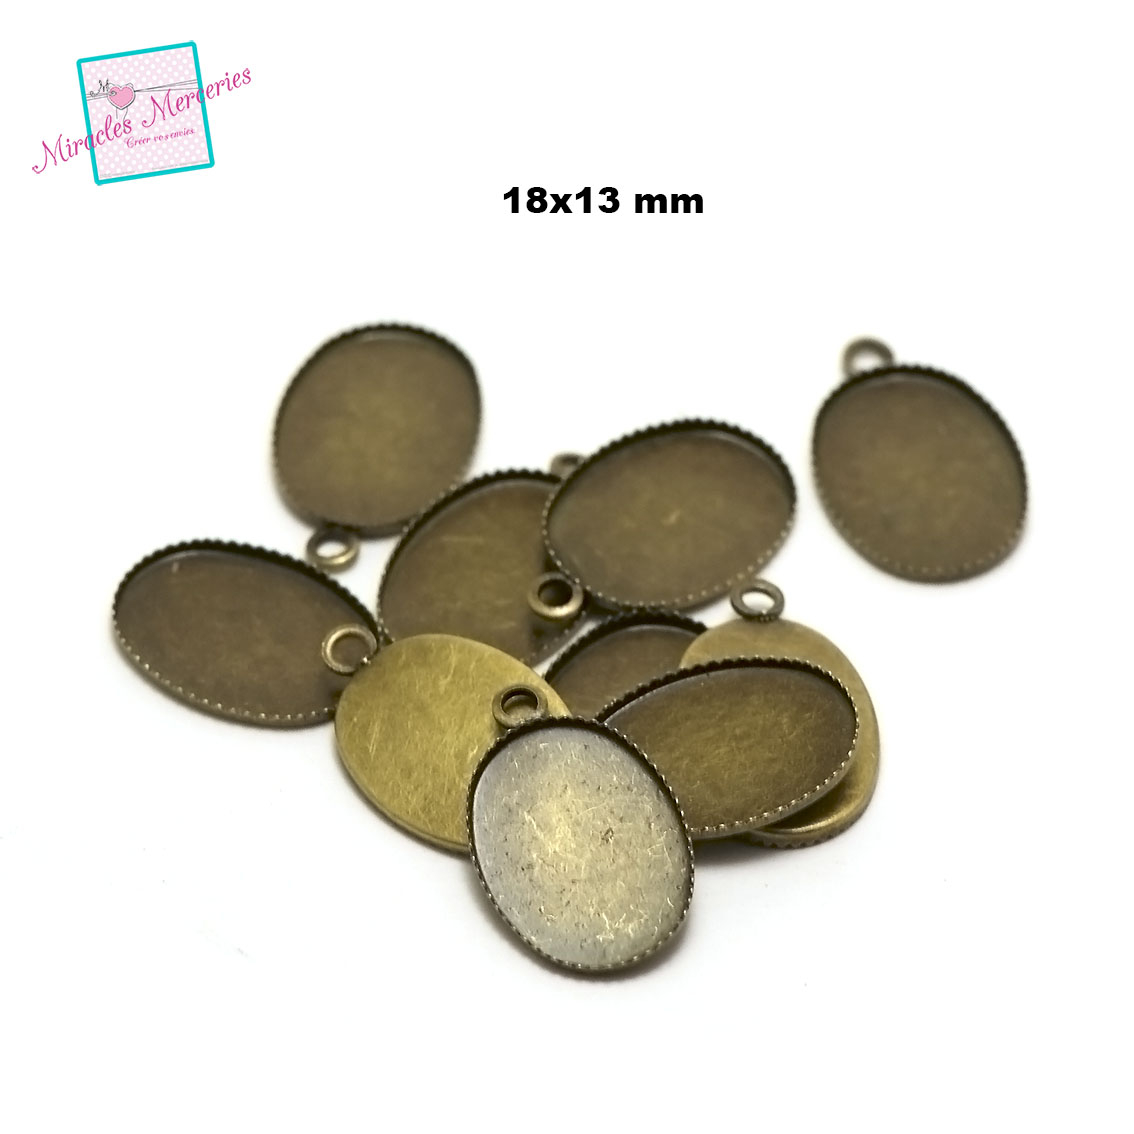 10 supports cabochon pendentif ovale 18x13 mm, bronze